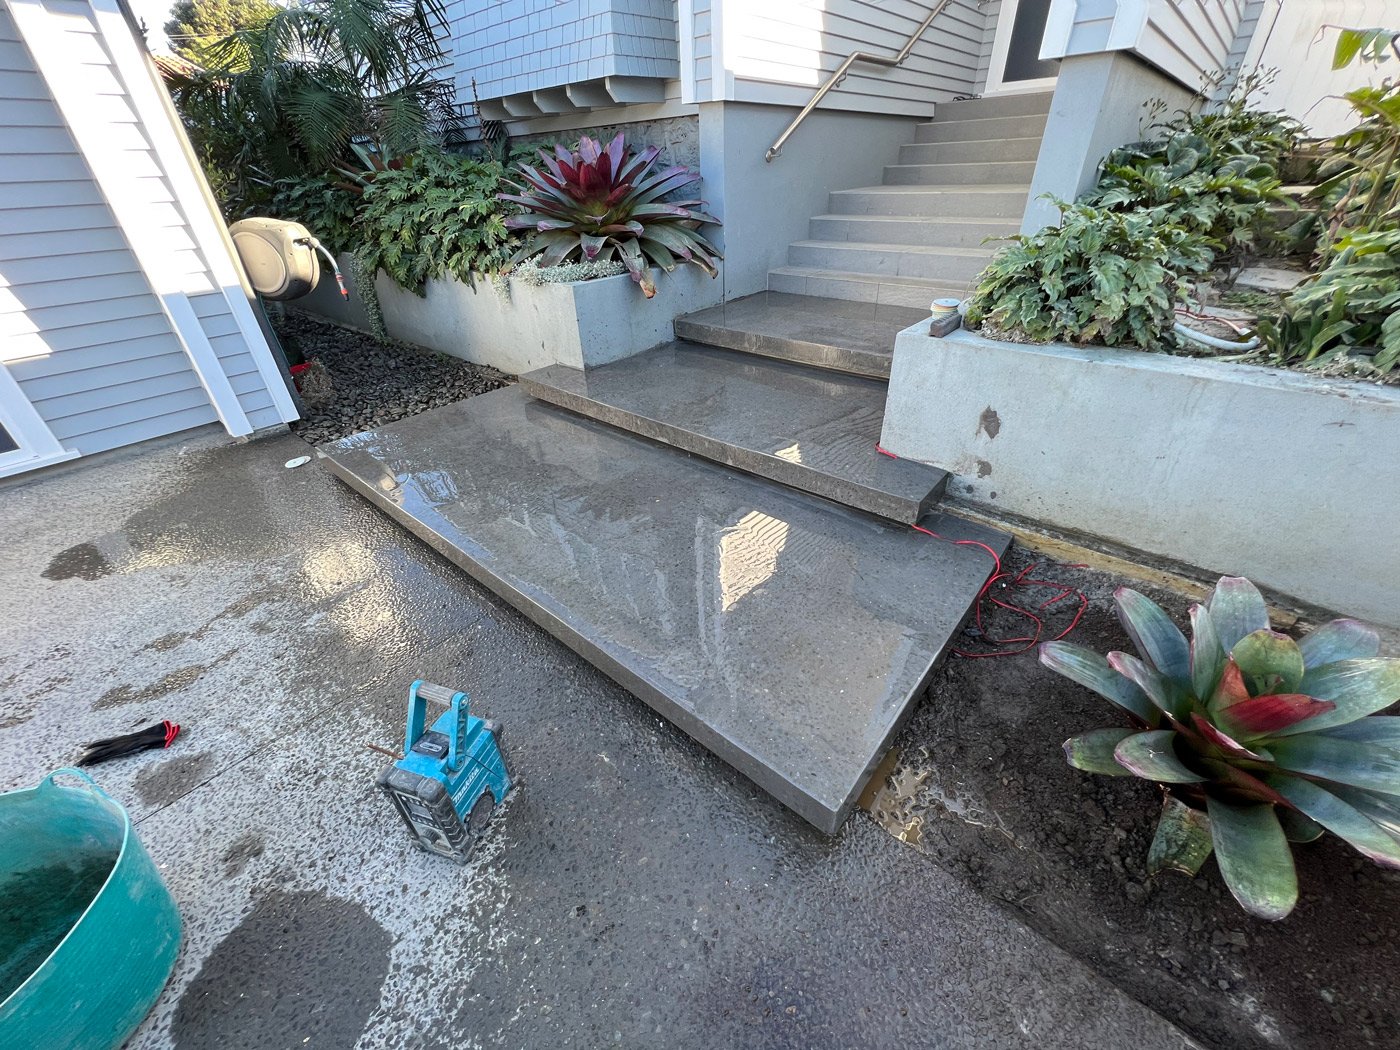 Freshly cleaned floating concrete front steps to a house with plants on the sides in the garden supported by a concrete retaining wall